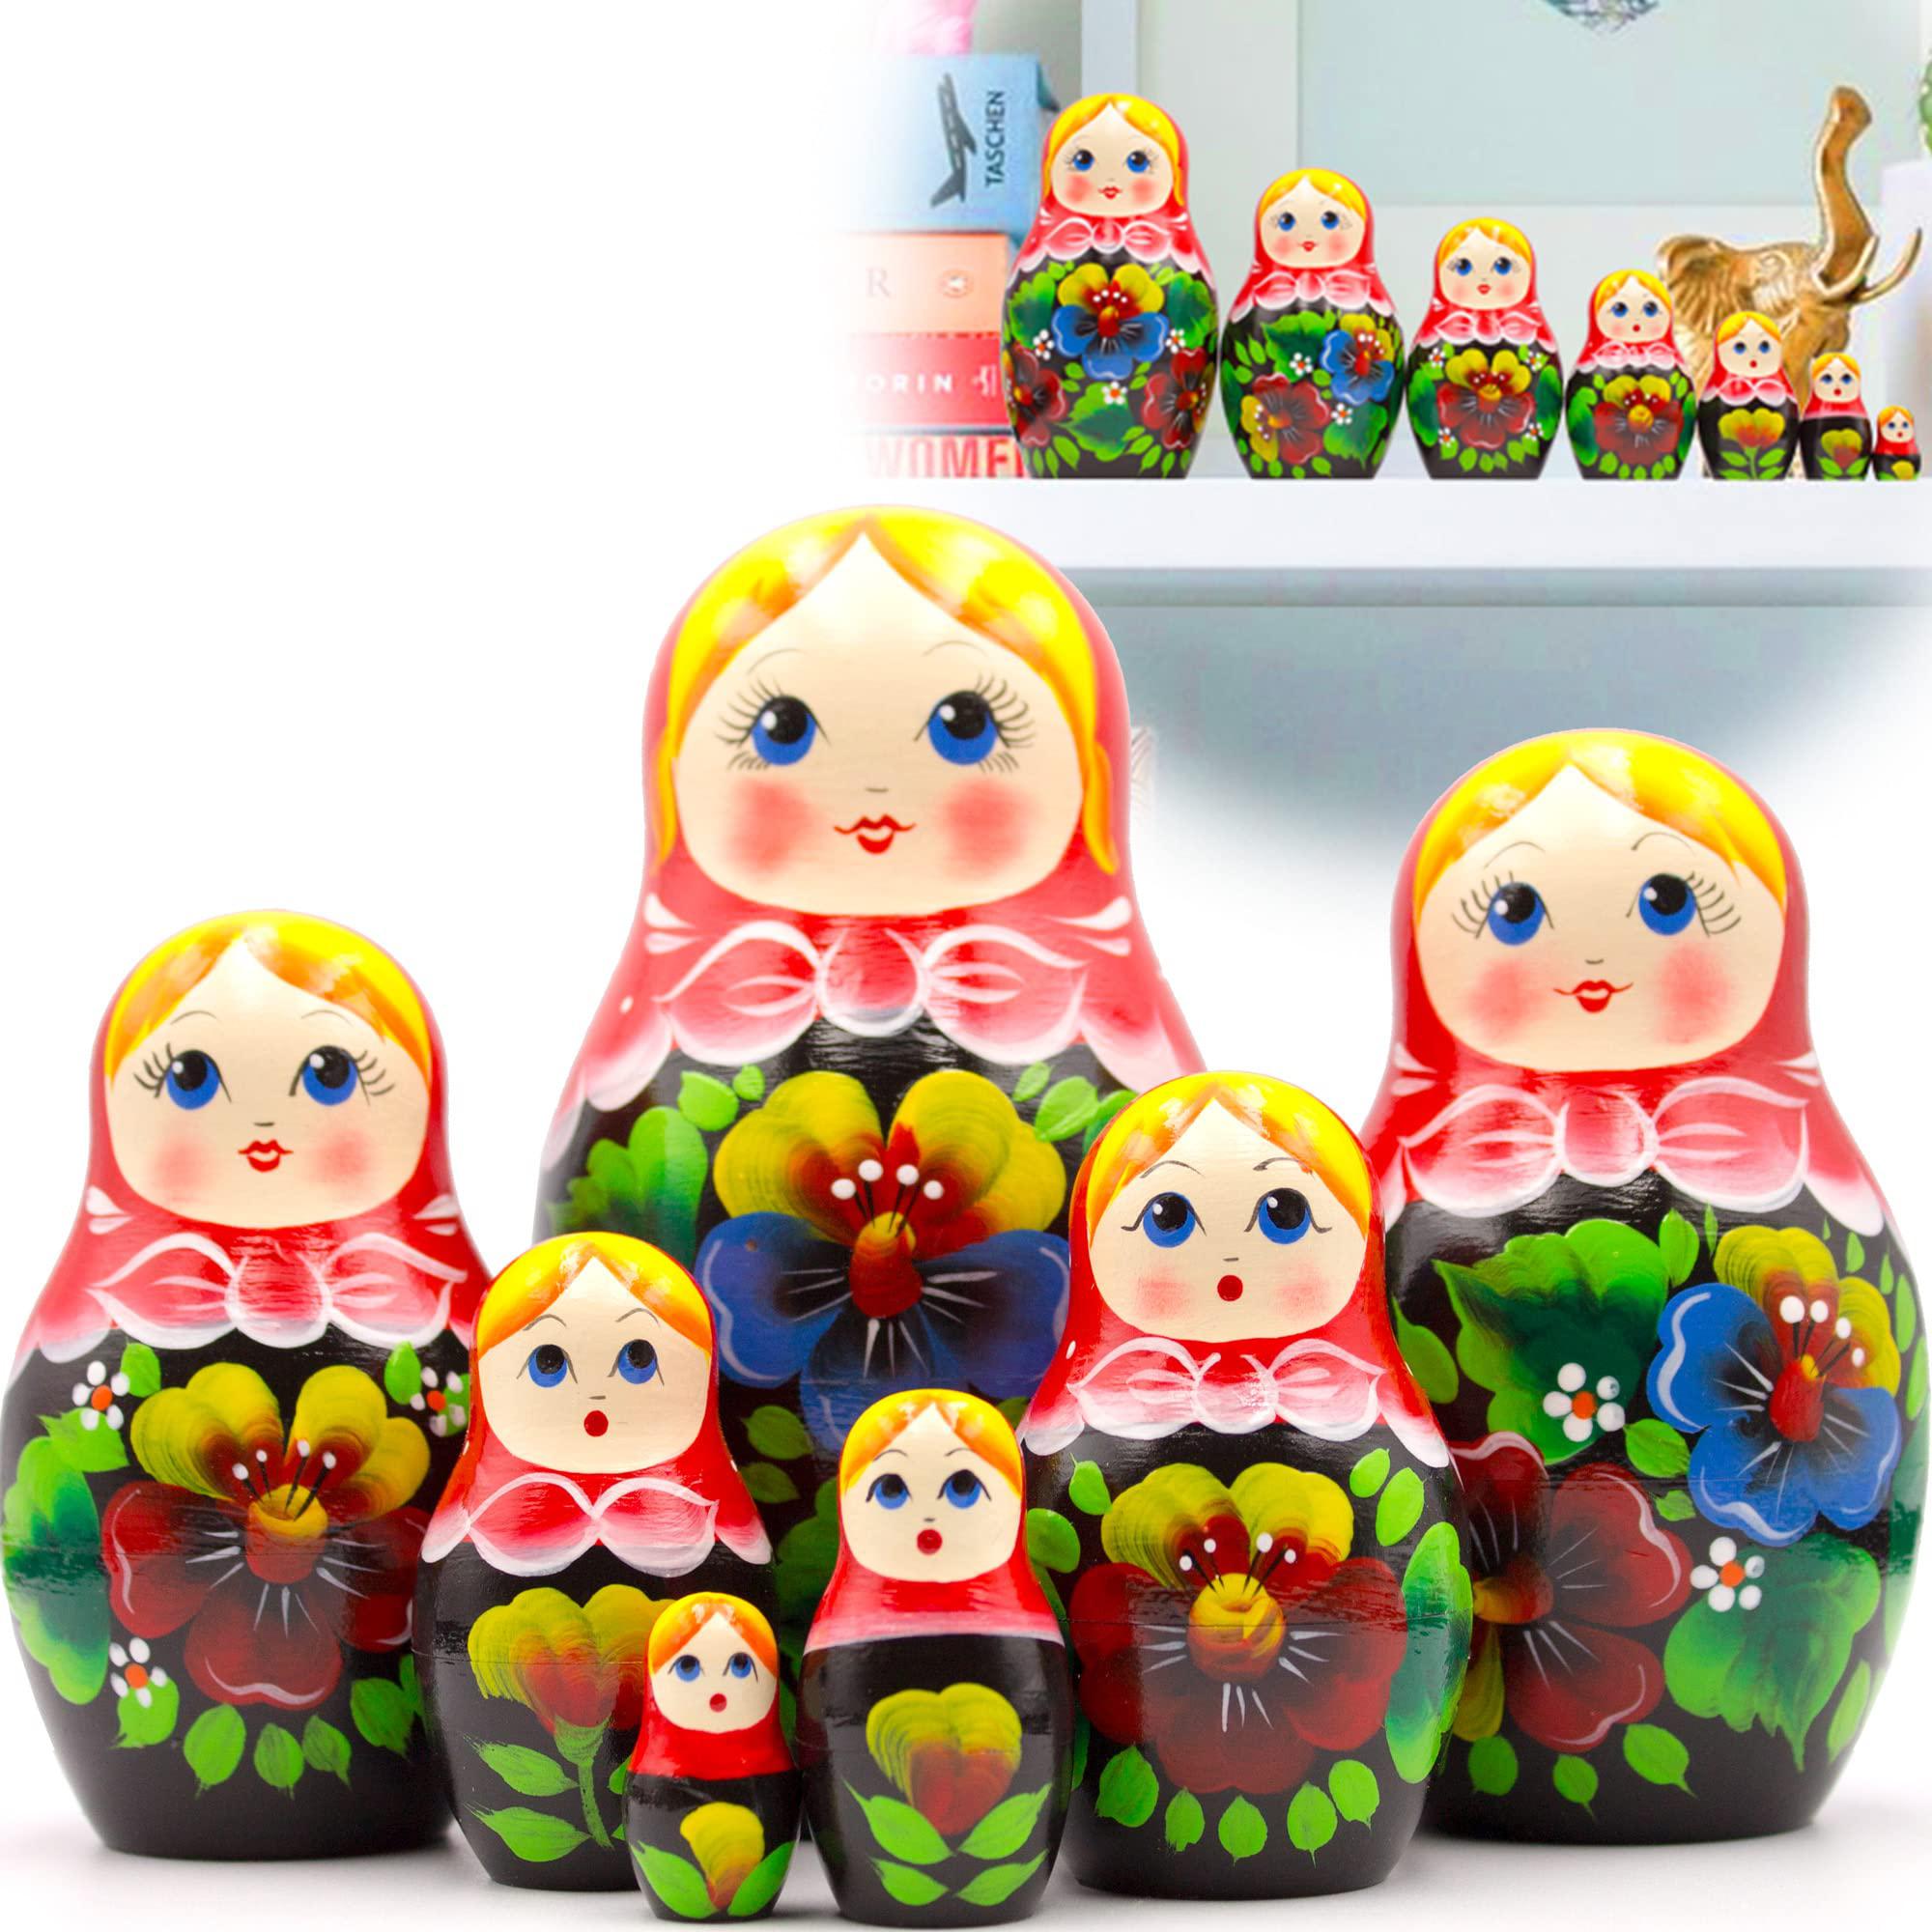 aevvv russian nesting dolls set of 7 pcs - matryoshka dolls in red head scarf and sarafan dress with pansy flowers - handmade